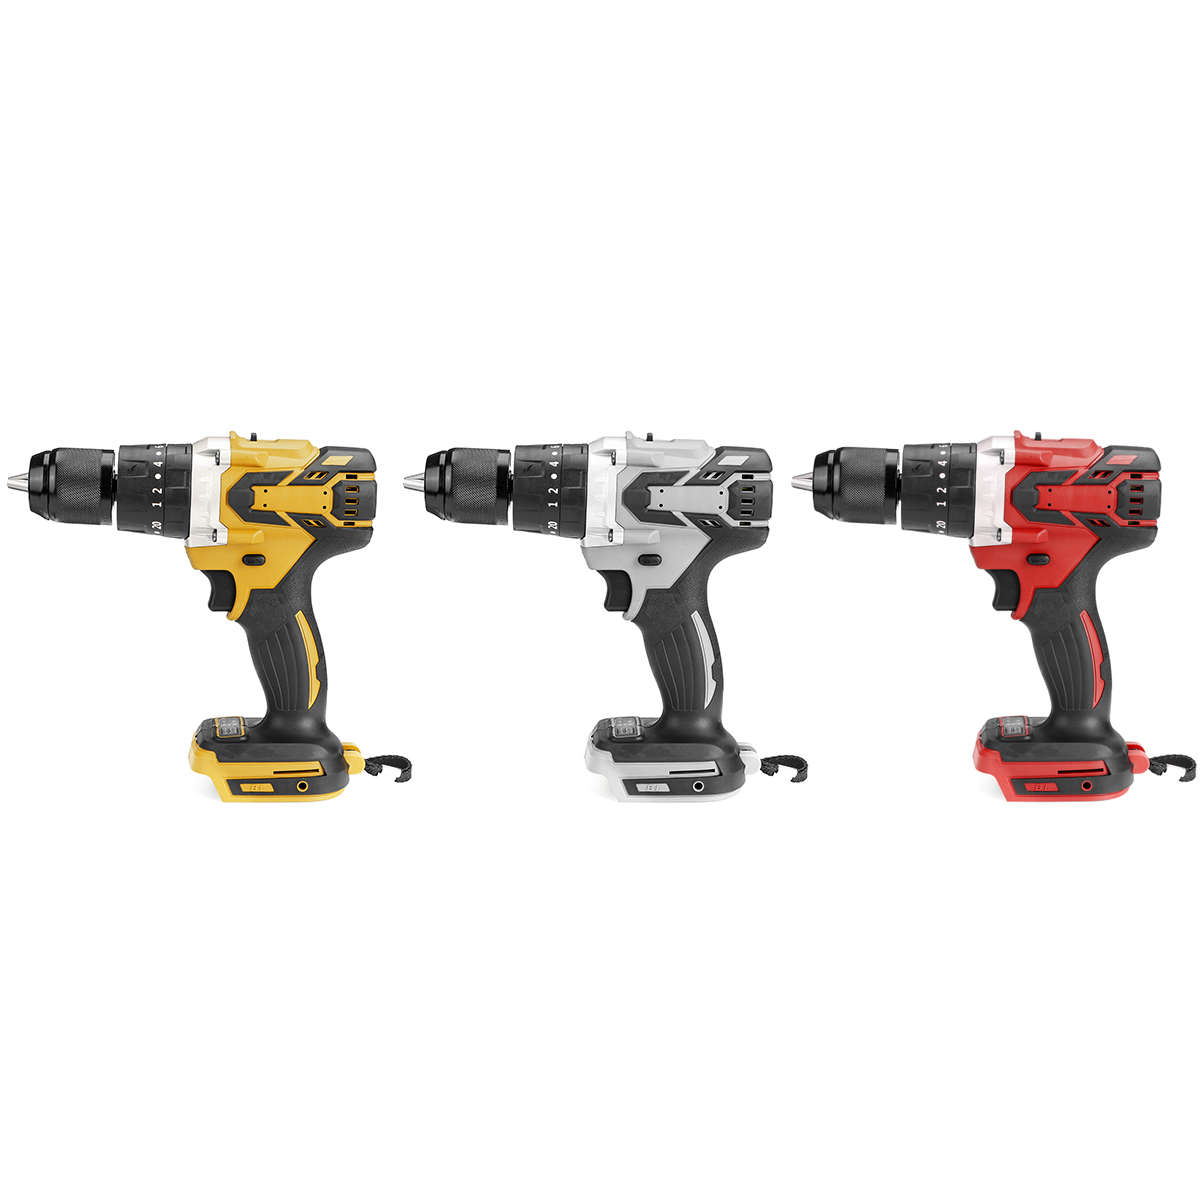 13mm-3-In-1-Brushless-Impact-Drill-Hammer-Cordless-Elctric-Hammer-Drill-Adapted-To-18V-Makita-Batter-1715080-7